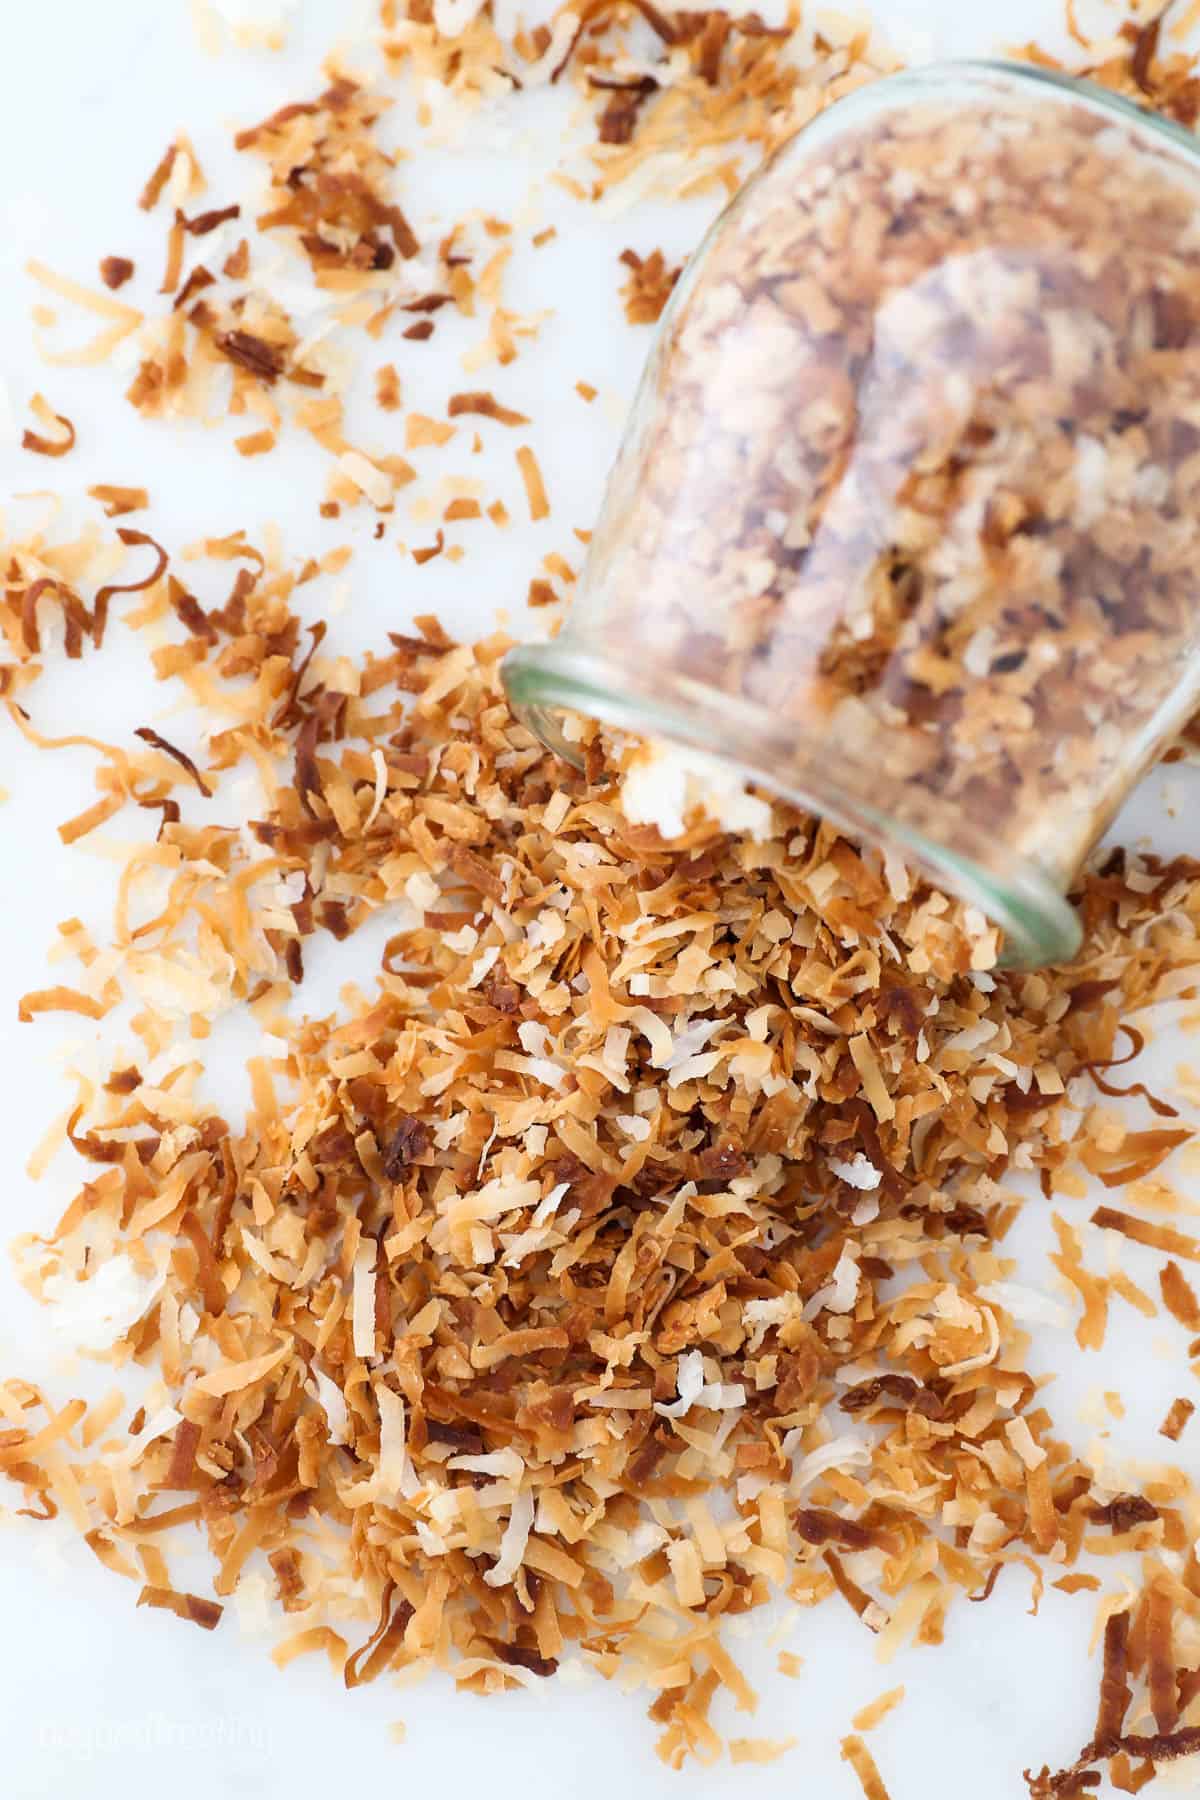 Toasted coconut spilling out on the counter from a glass jar